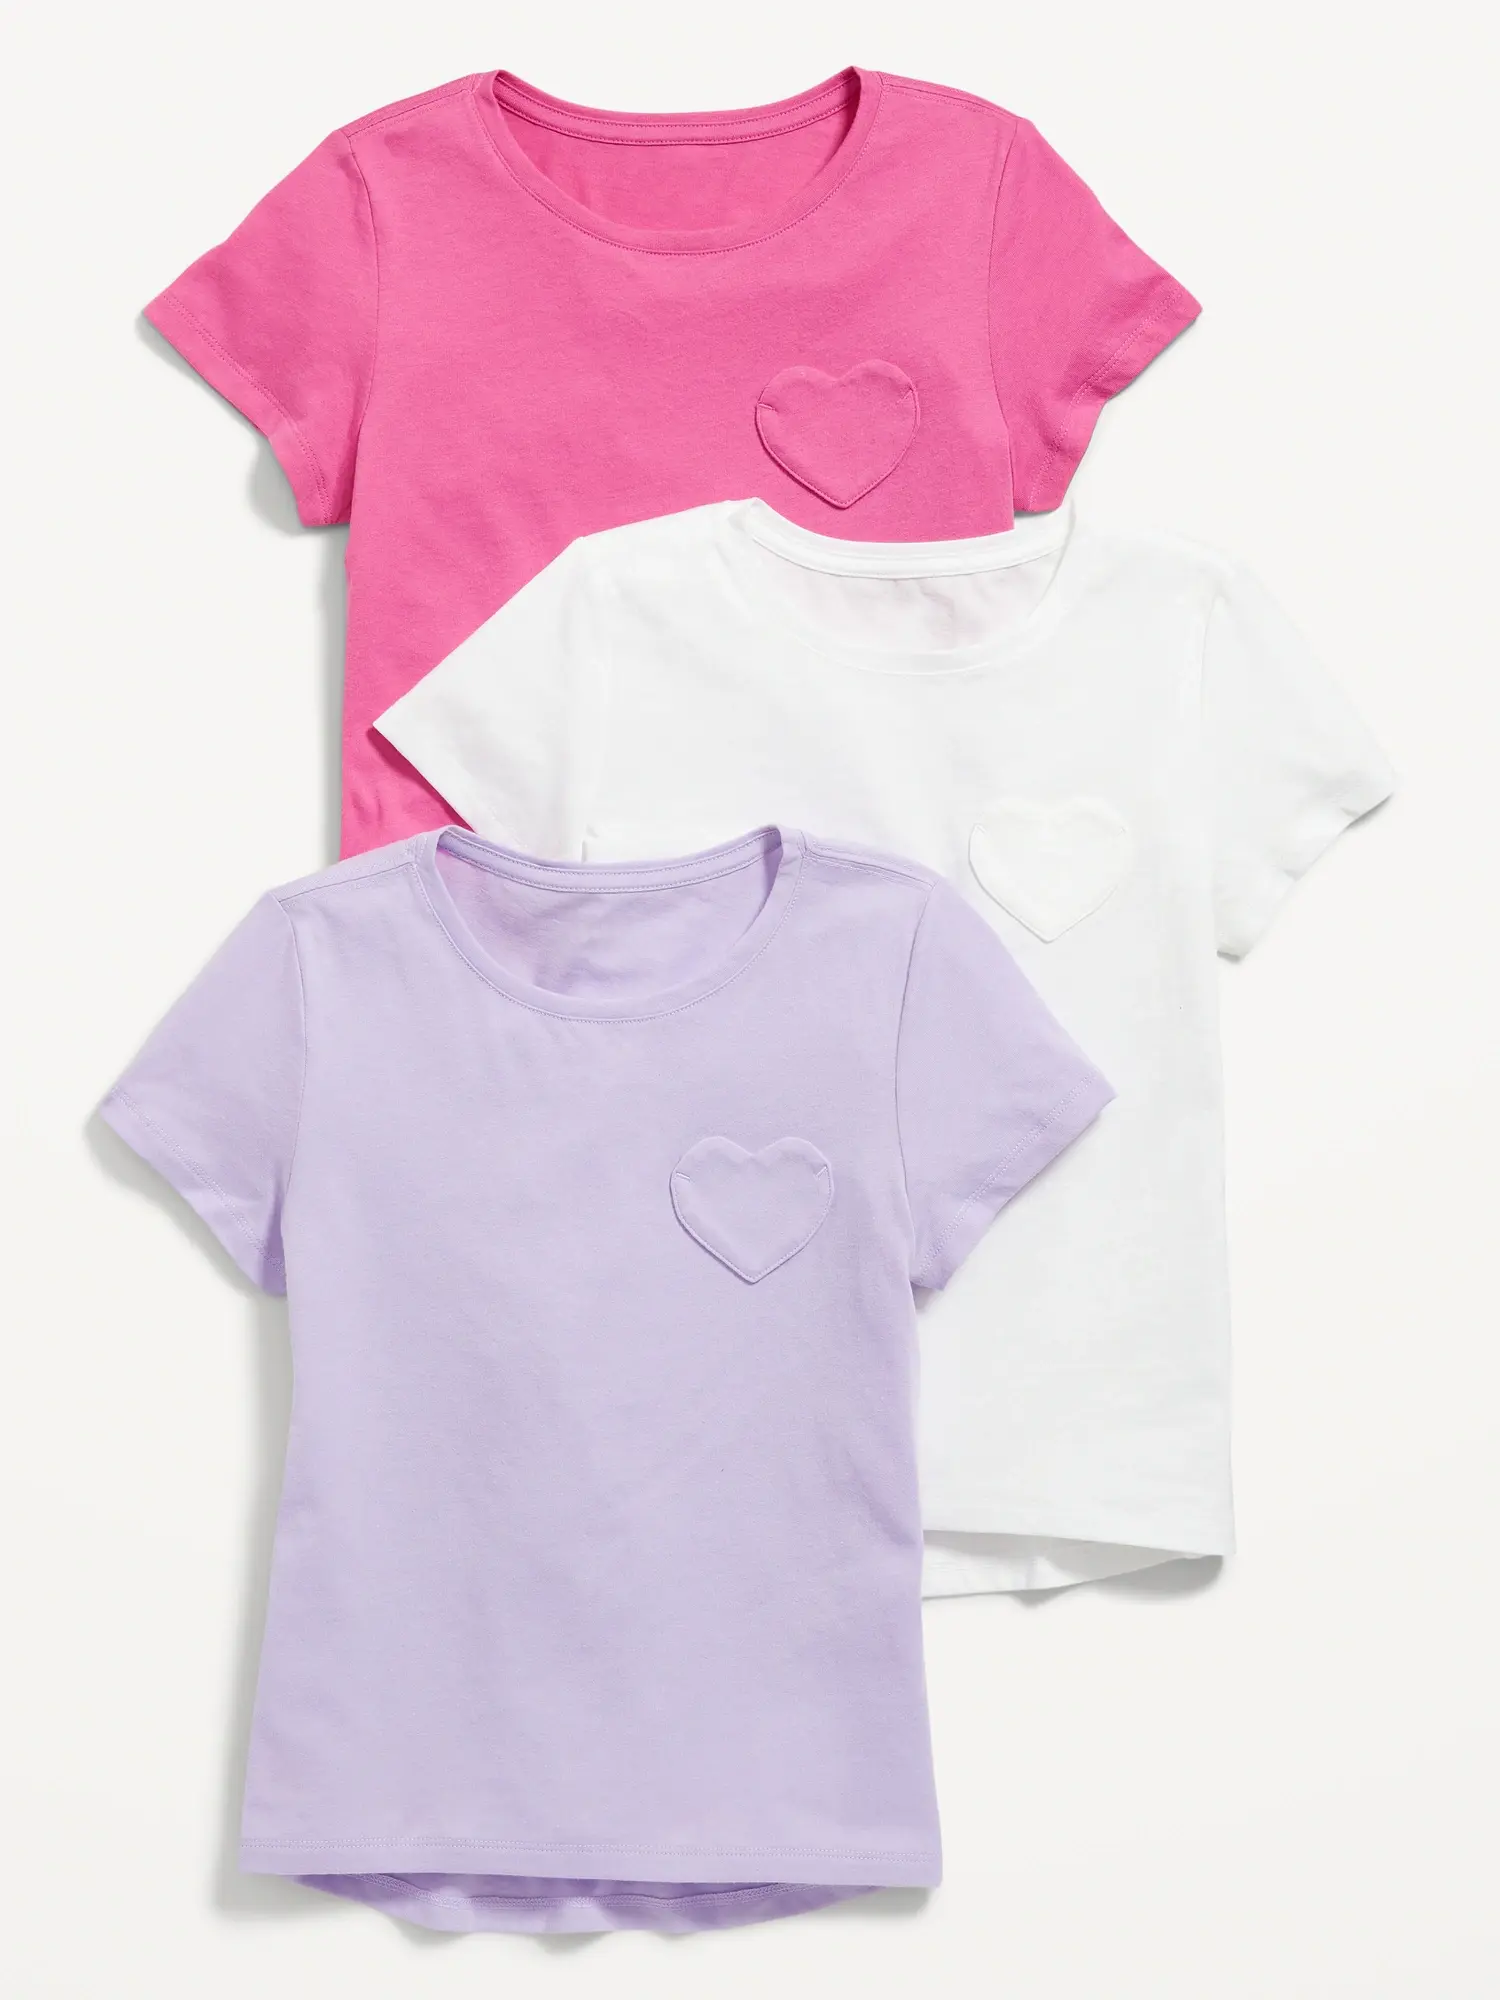 Old Navy Softest Short-Sleeve T-Shirt Variety 3-Pack for Girls pink. 1